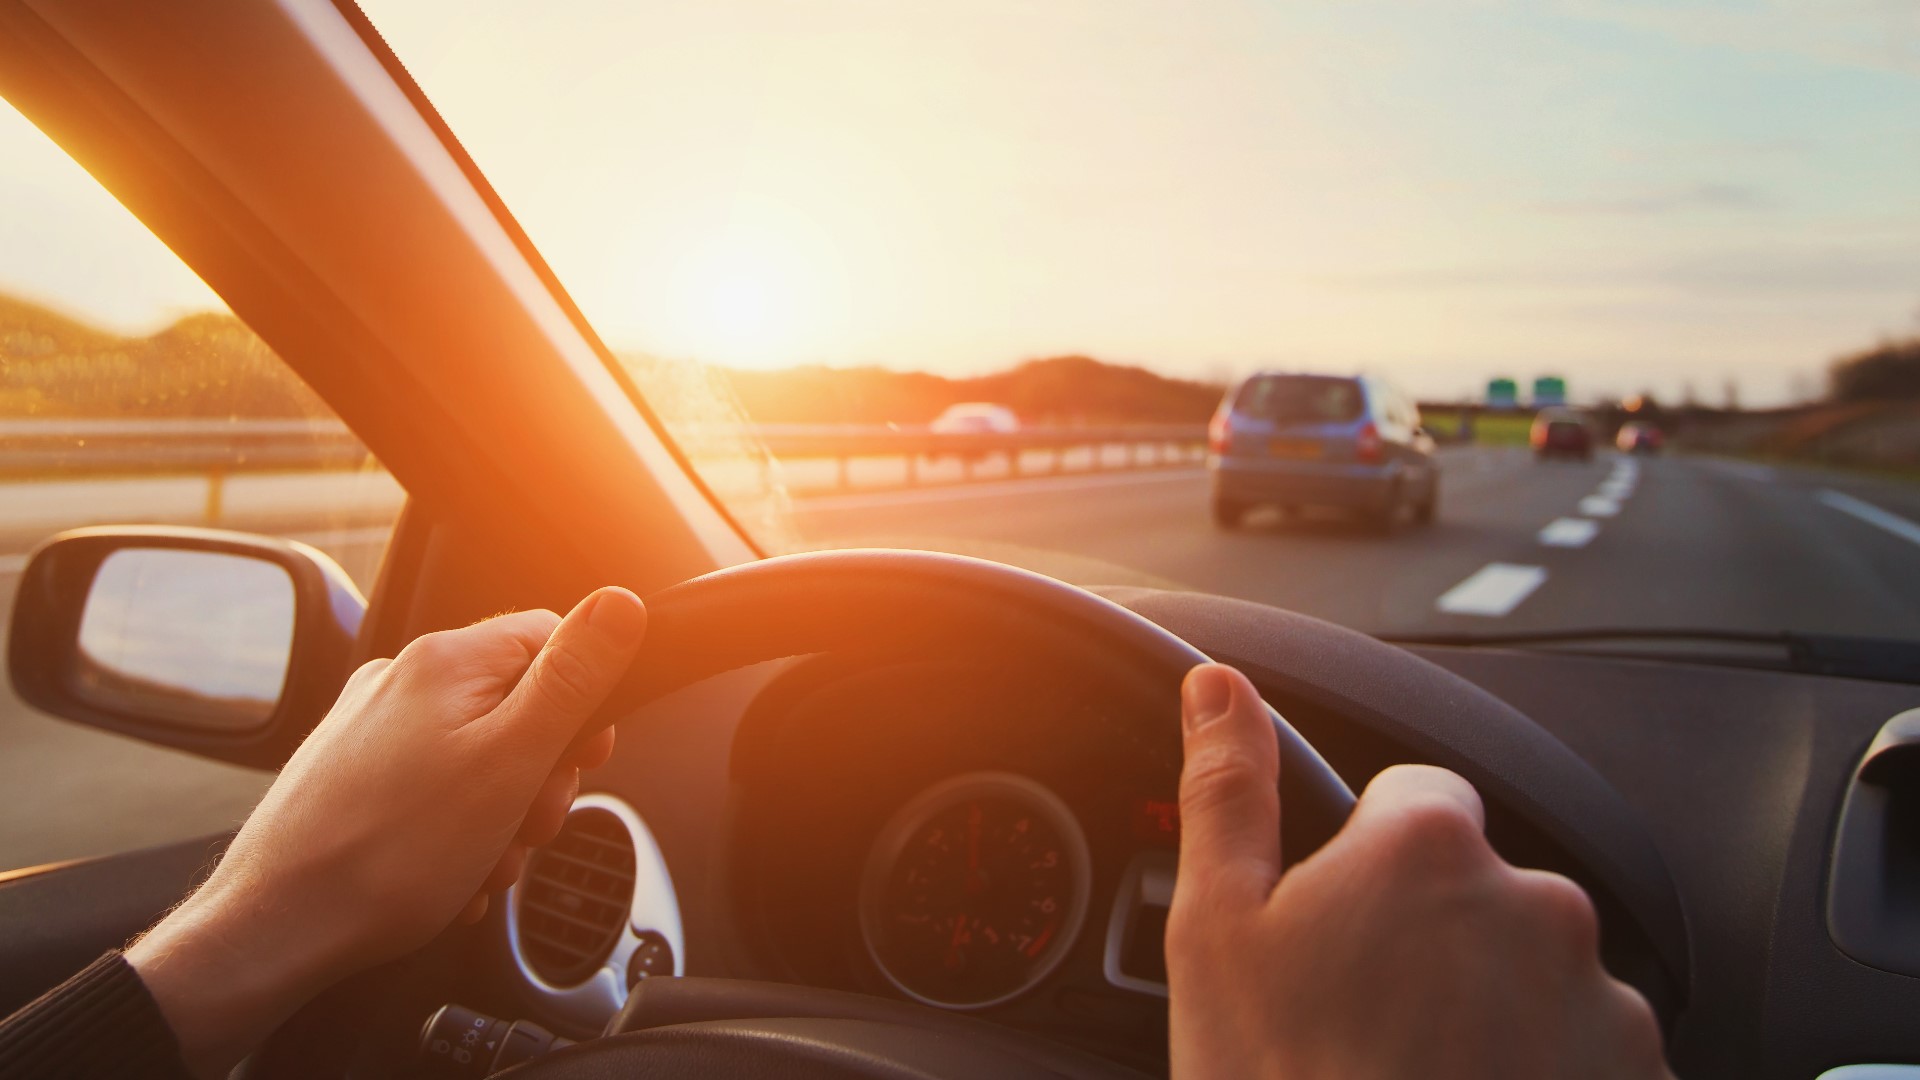 If you’re planning on hitting the road with the family soon, there are some safety precautions you should consider before packing up the car.